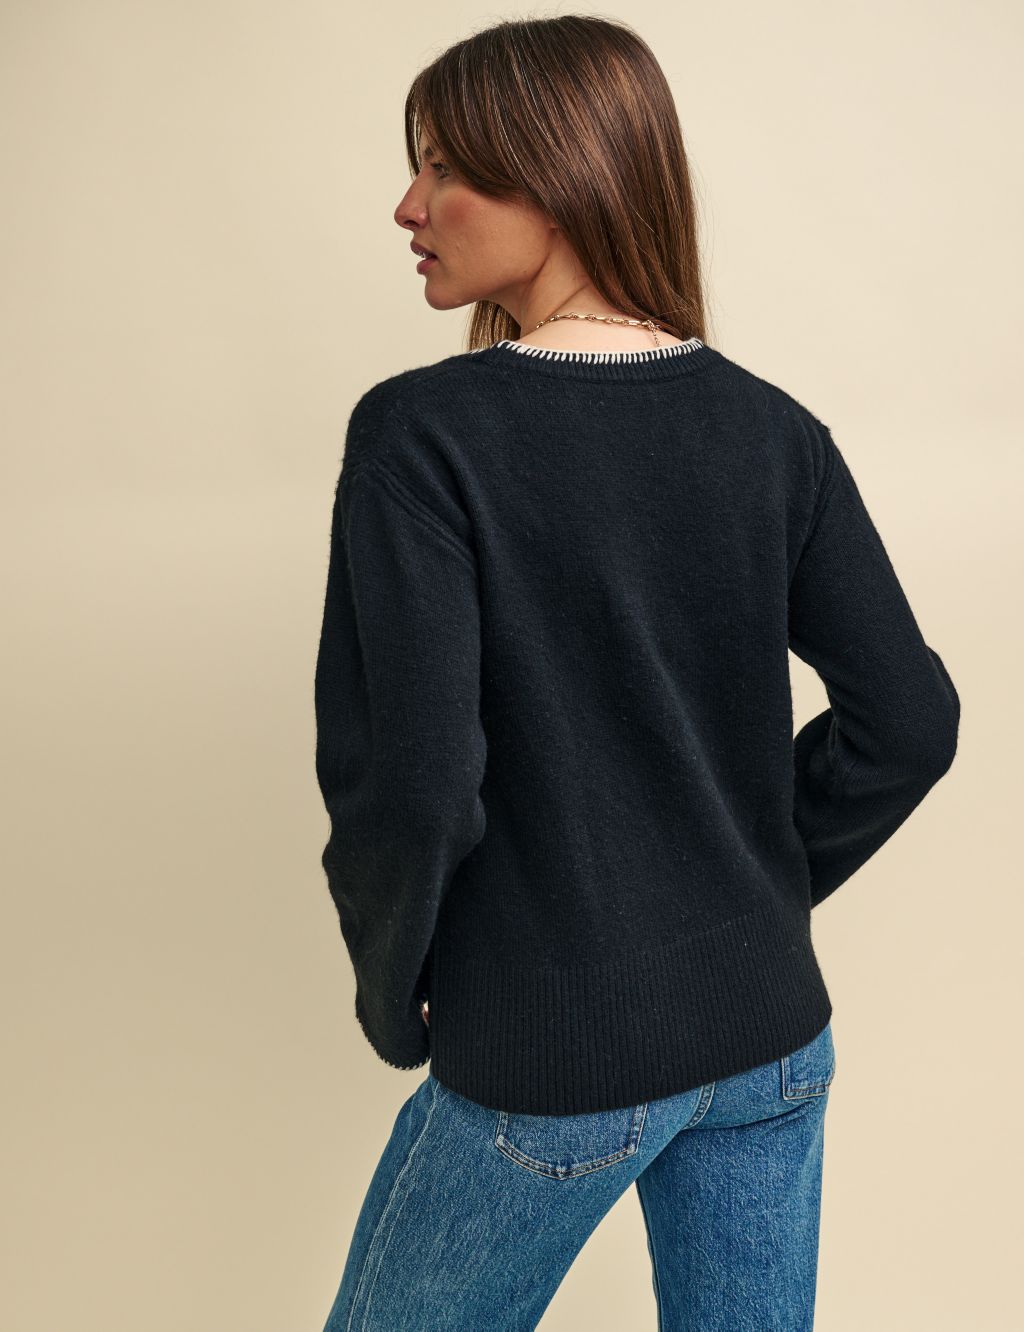 Scoop Neck Relaxed Jumper image 3